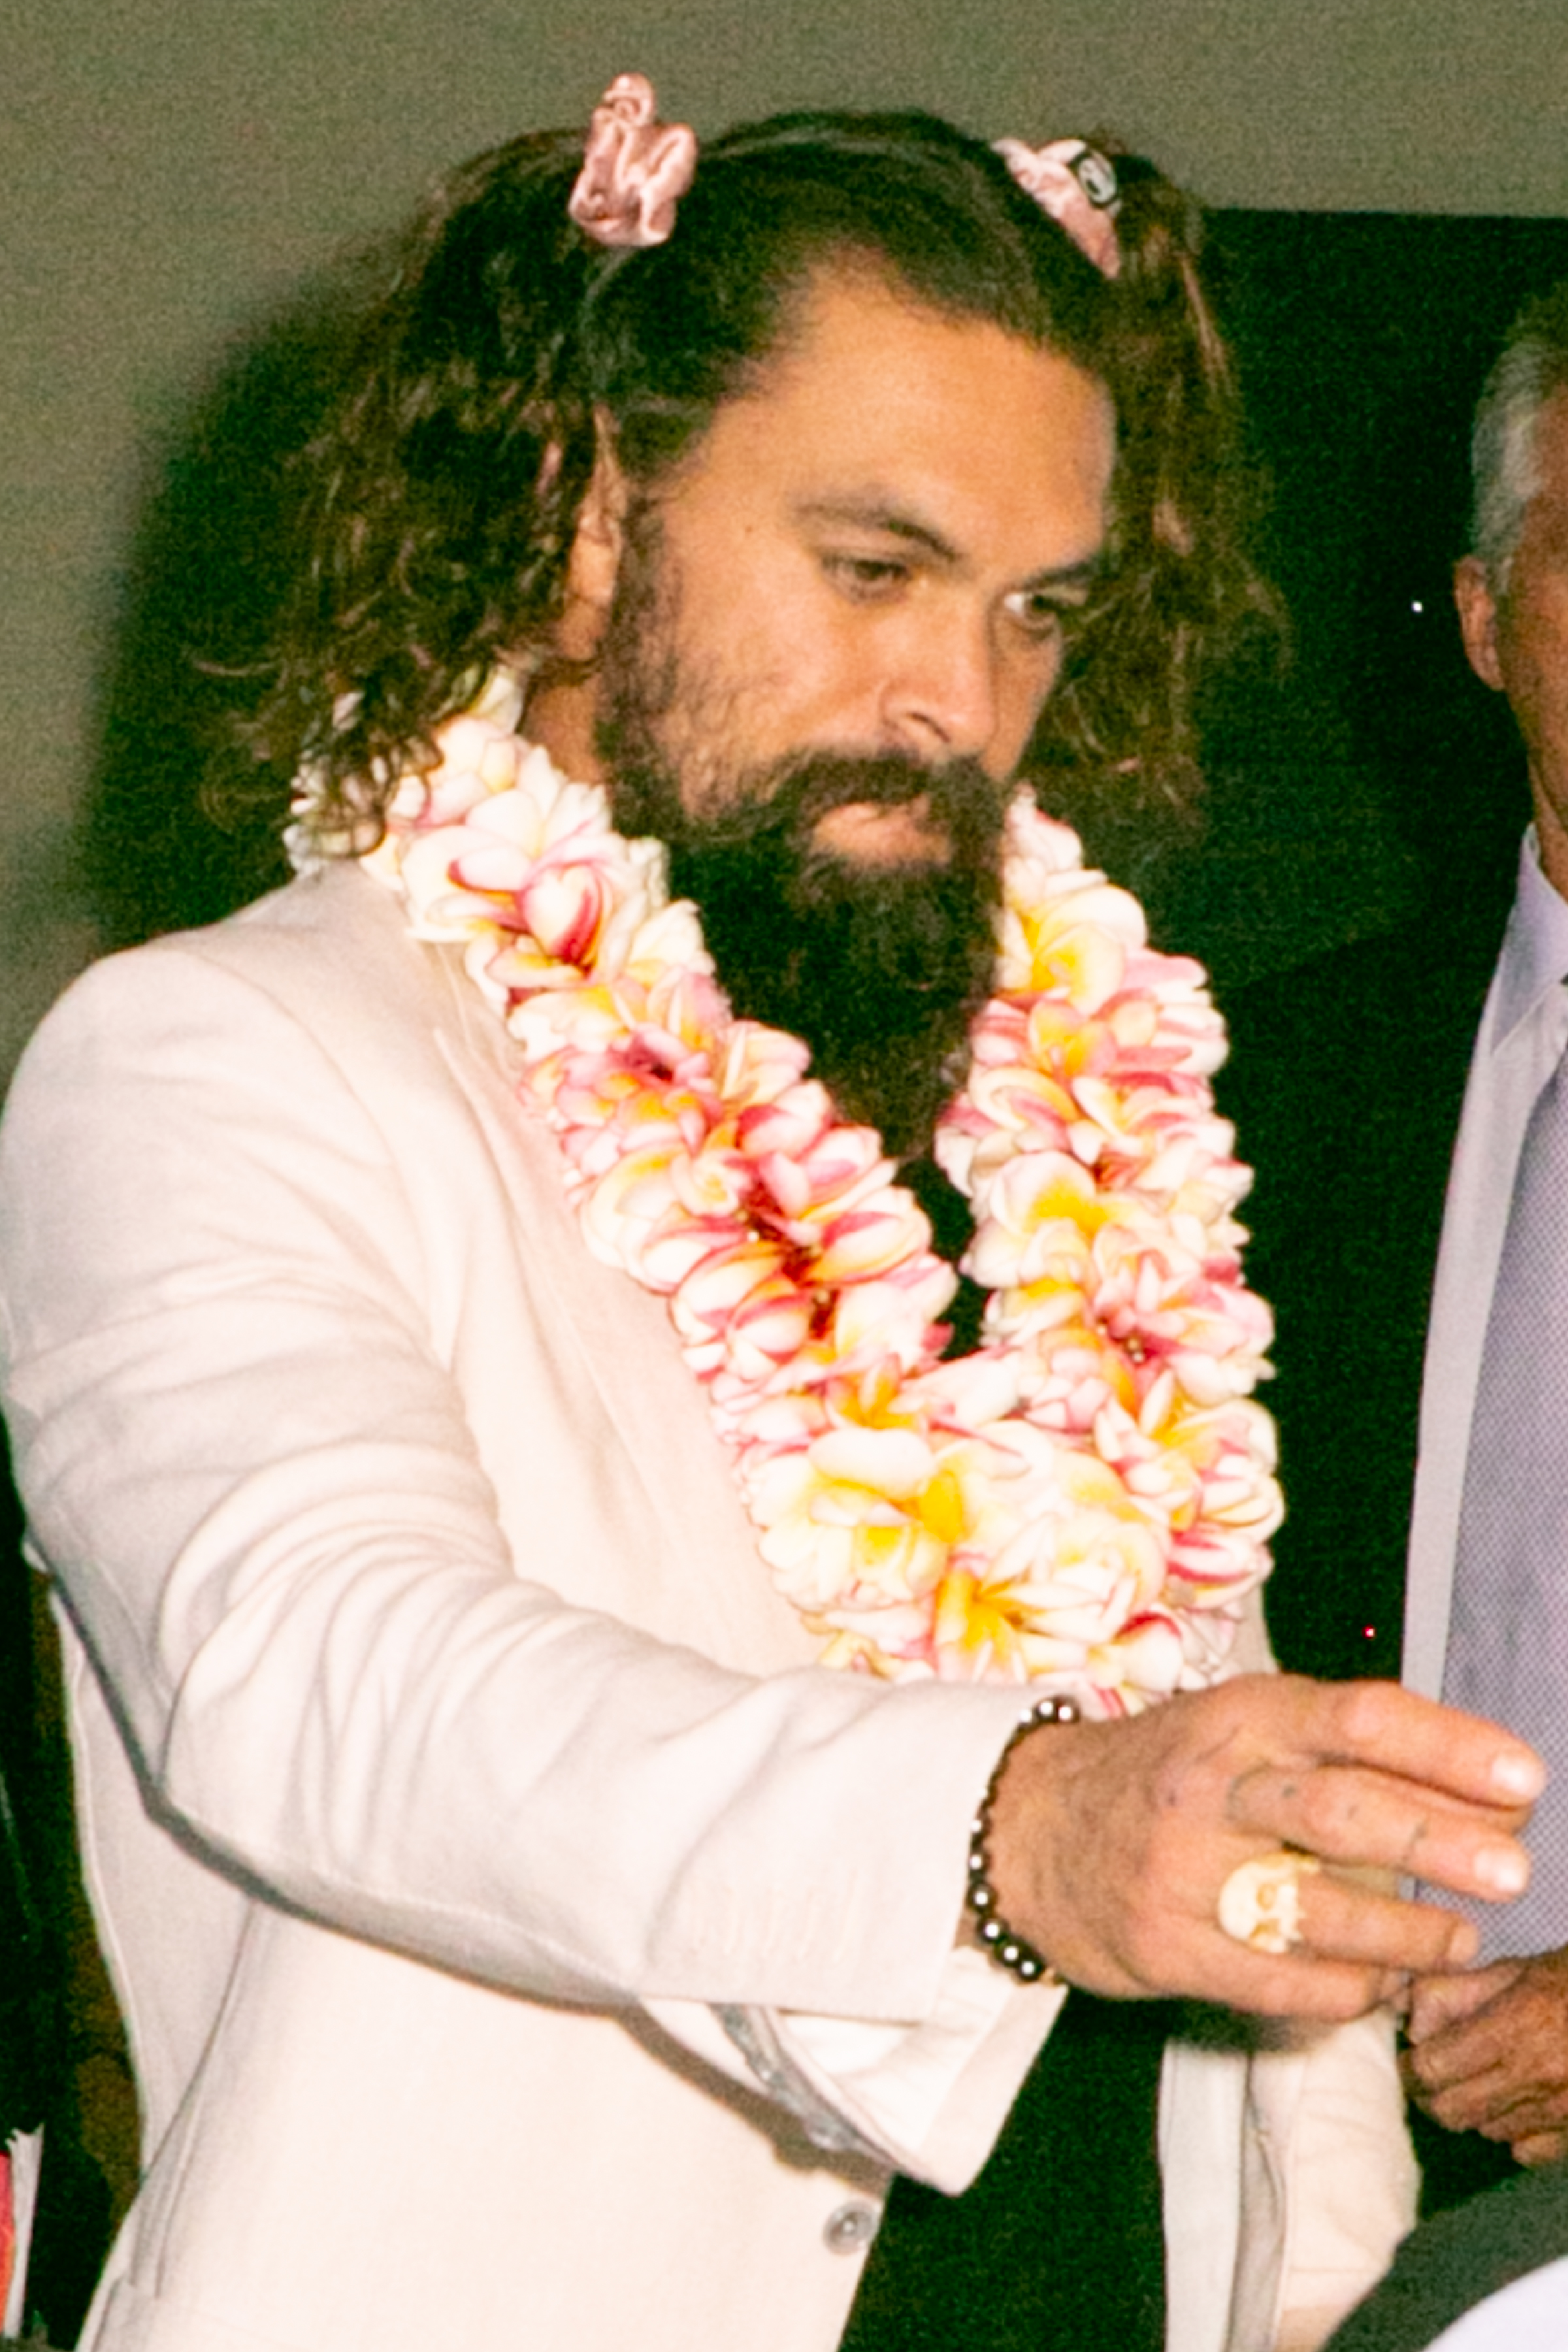 Are You This Get Up? 'Aquaman' Jason Momoa Rocks Pink Scrunchie'd Pigtails - Bossip